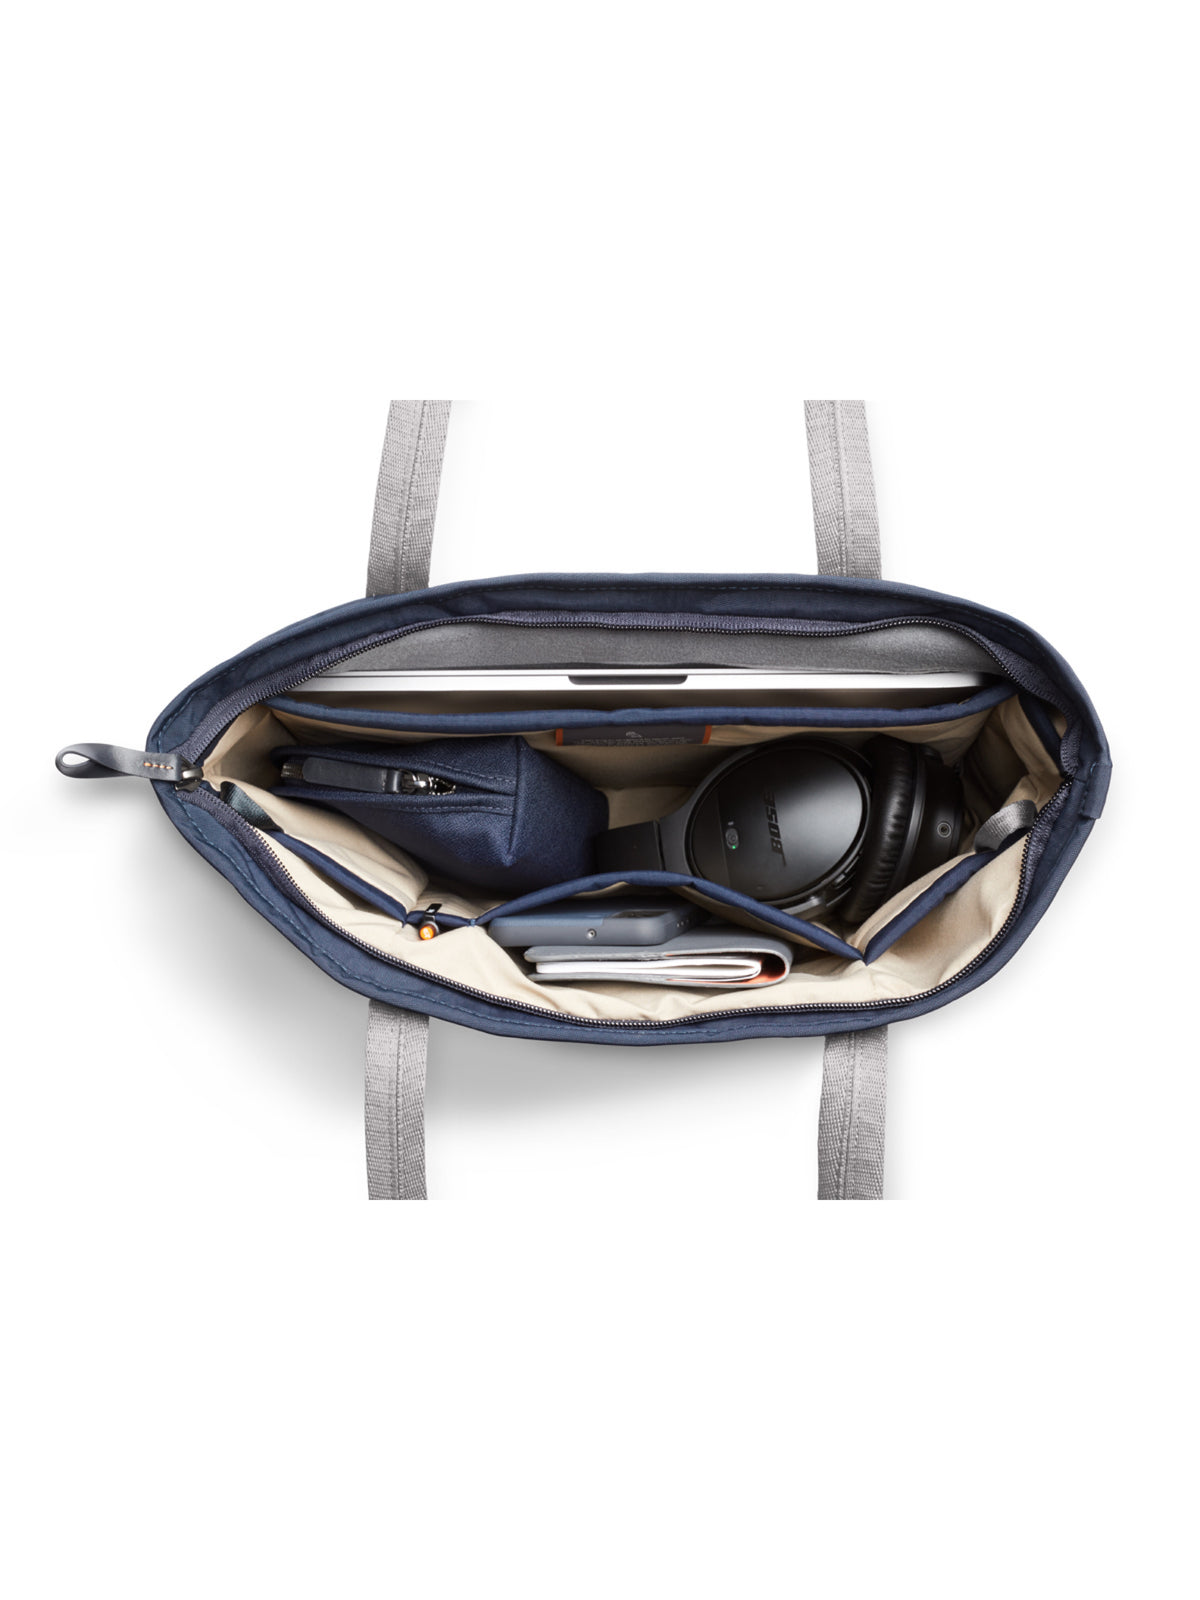 Bellroy Tokyo Tote Second Edition Navy